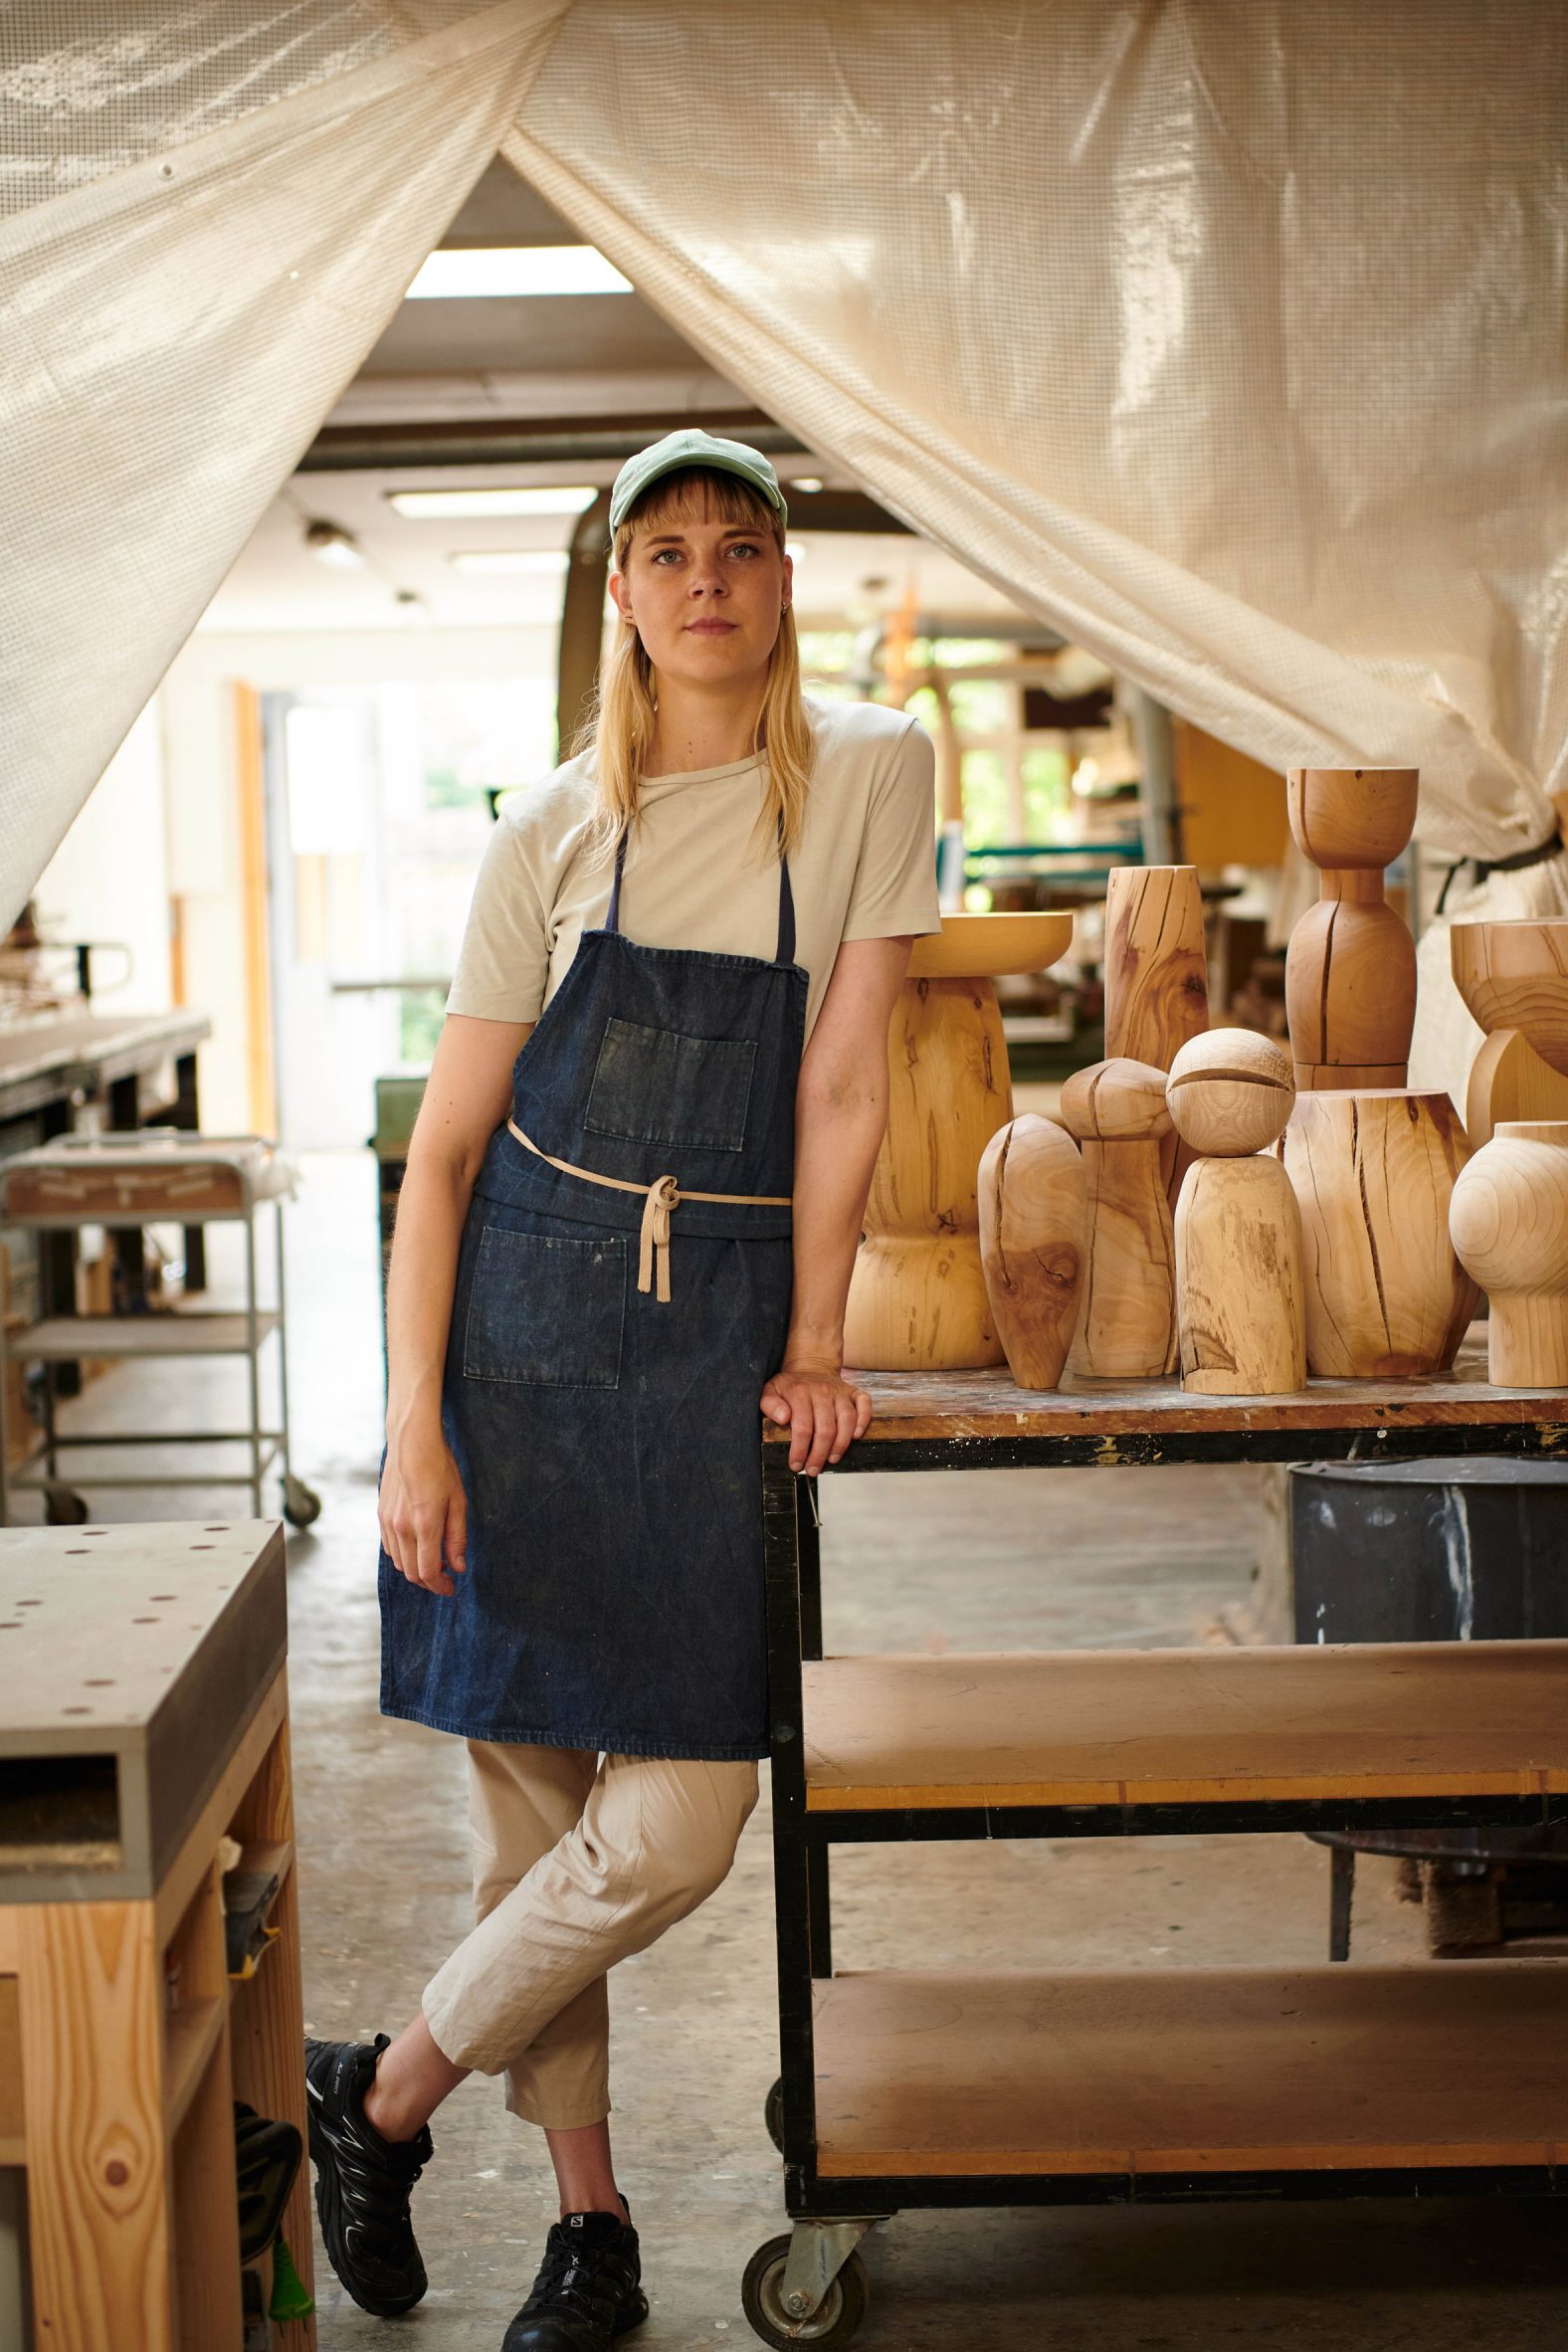 A photograph of a designer next to her wooden objects